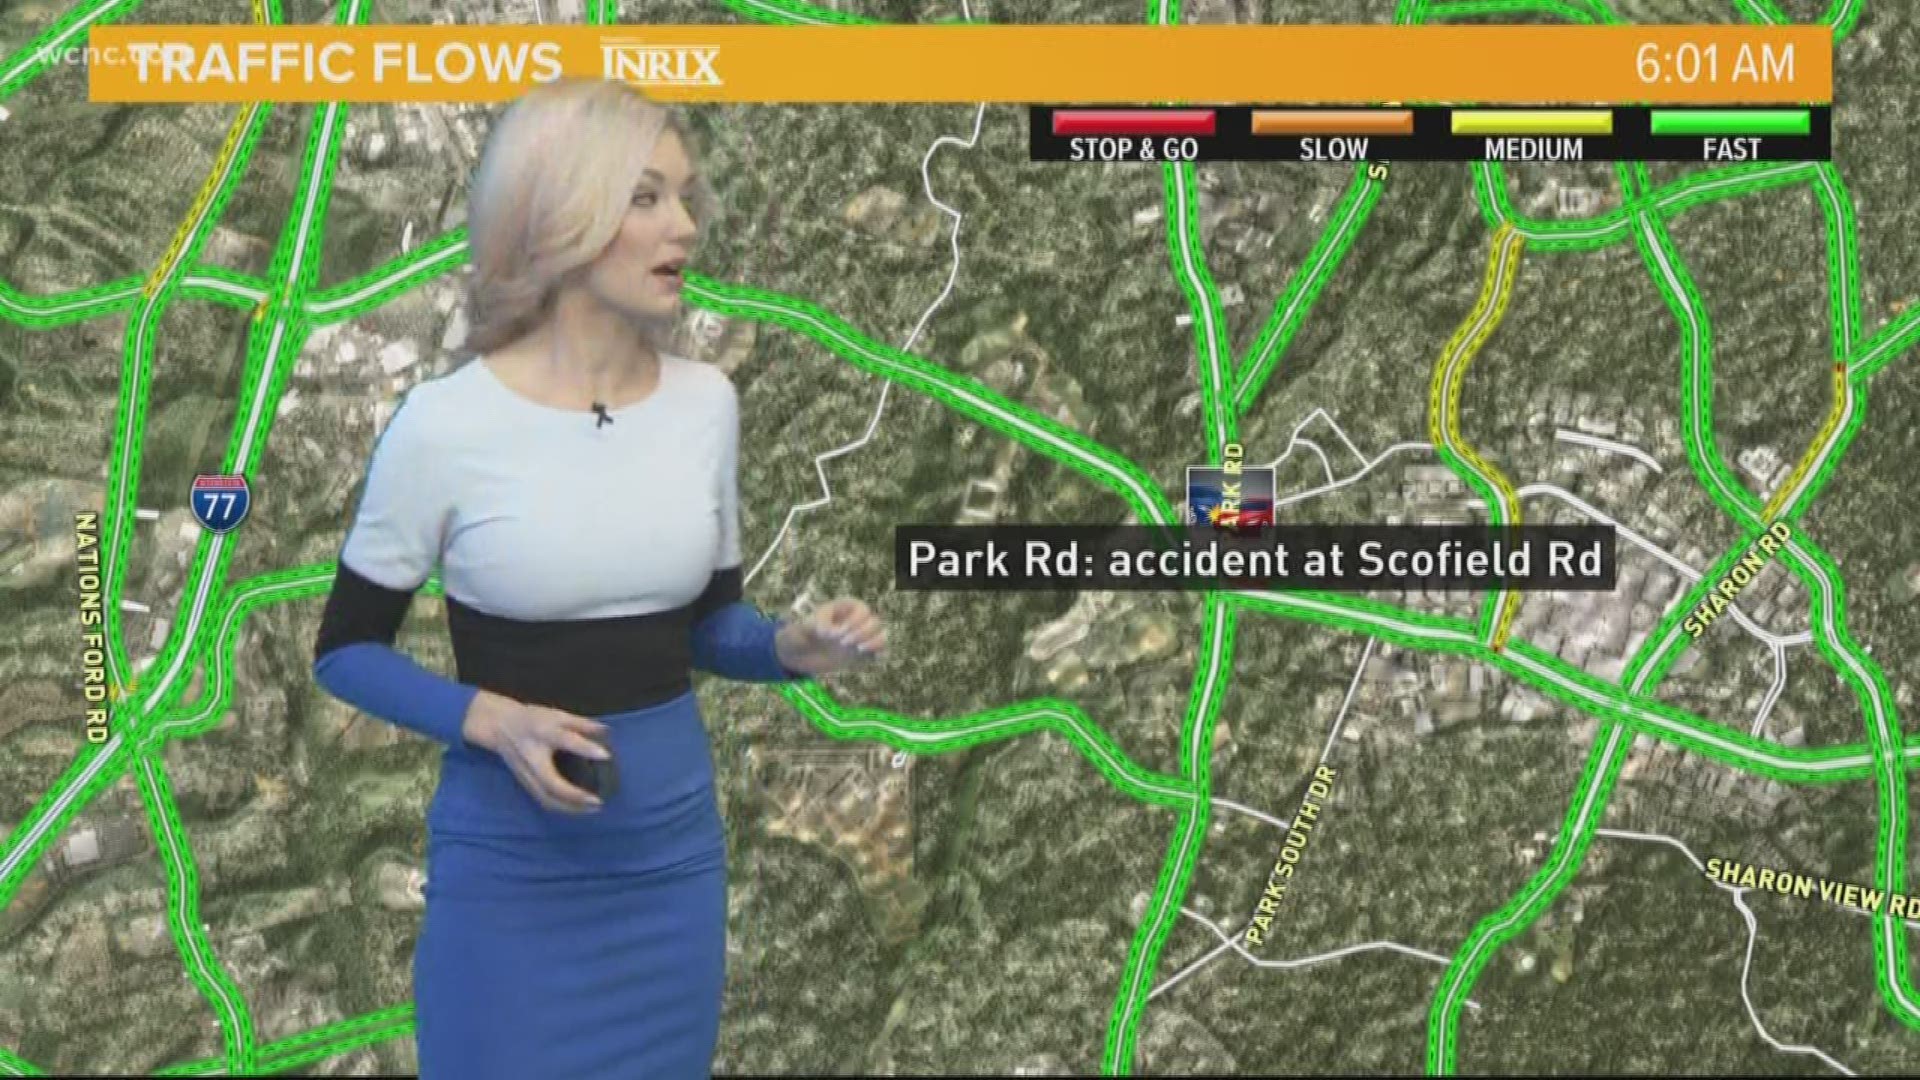 Drivers in south Charlotte are facing even heavier traffic on their morning commute after a crash on Park Road.